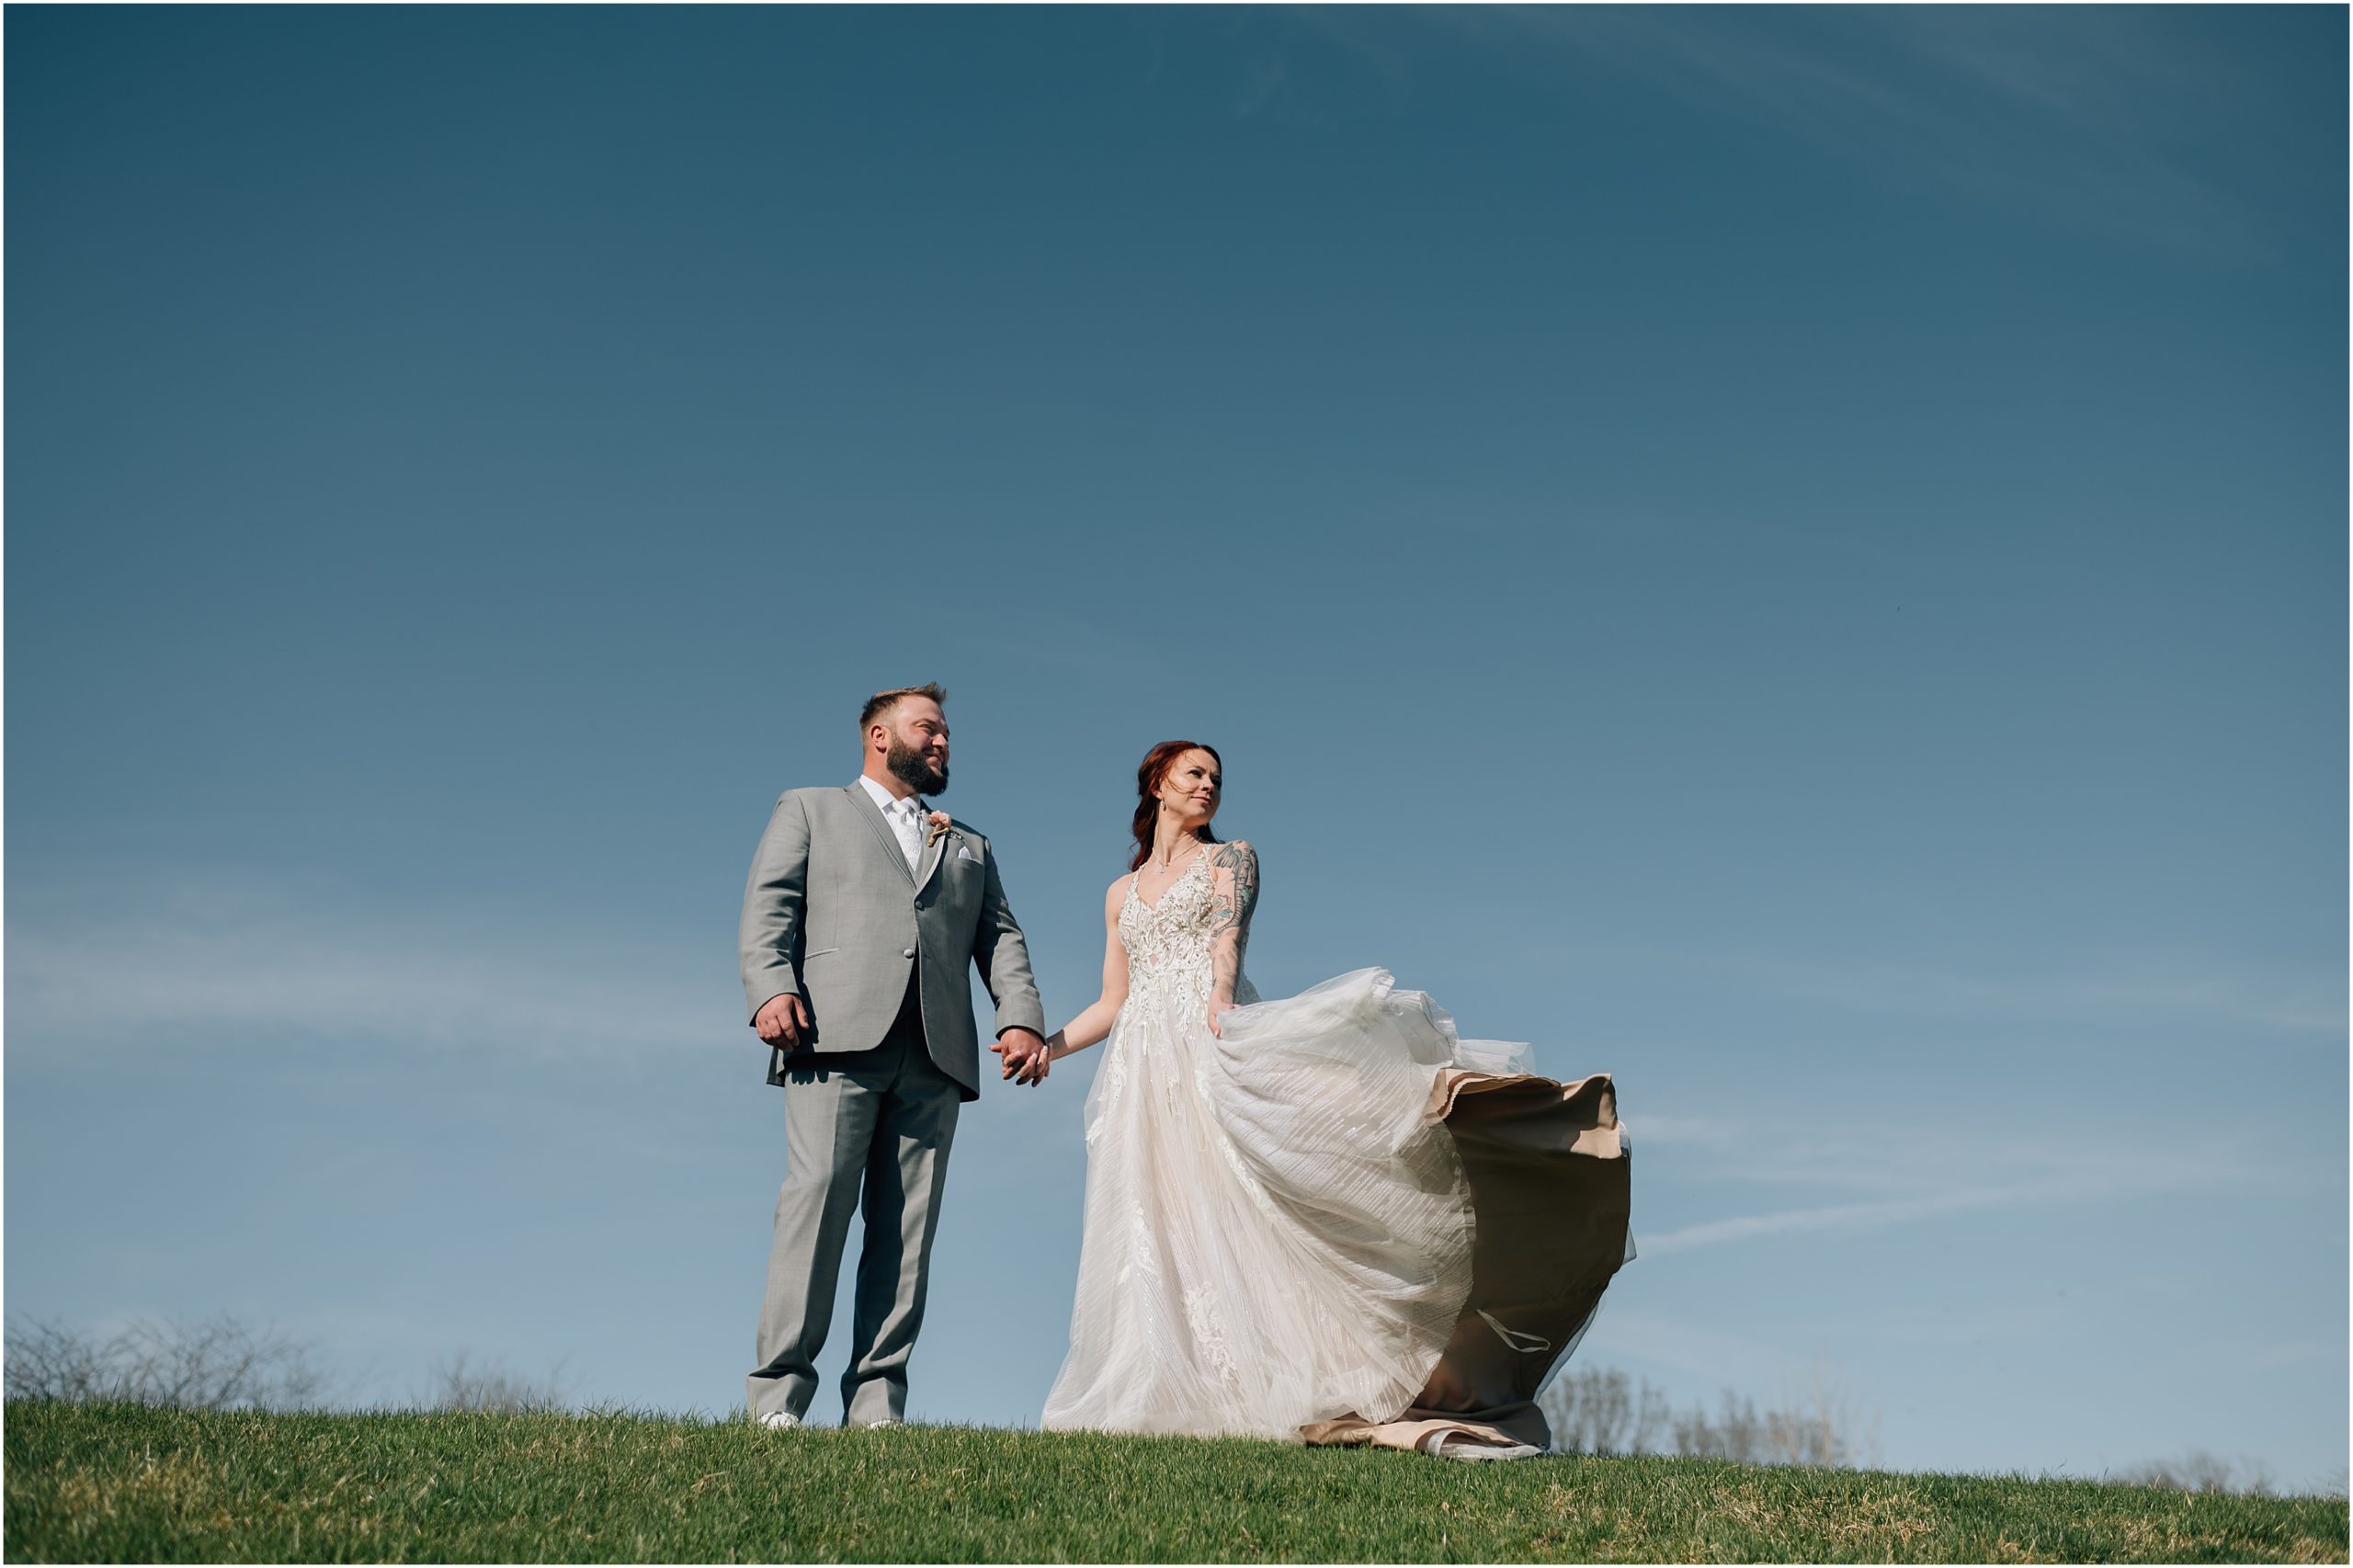 Bride in white dress with train and Groom in light grey suit walk on top of a hill with blue sky in the background at Honey Creek Resort on Rathbun Lake in Iowa. Photo by Anna Brace, who specializes in Omaha NE wedding photography.